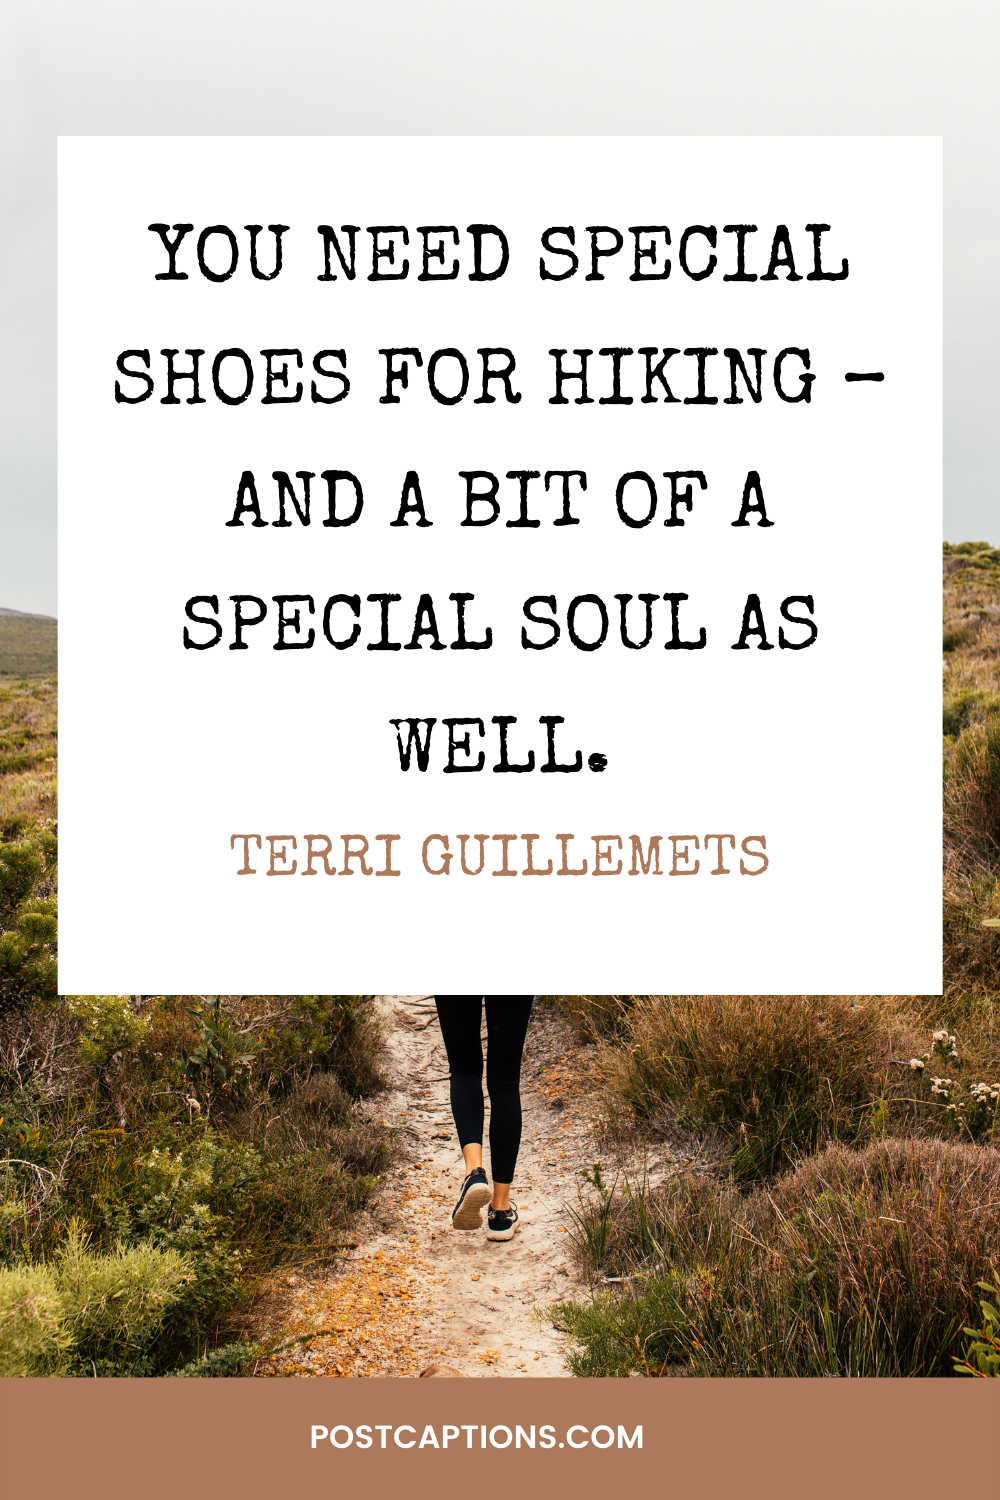 Hiking quotes for Instagram